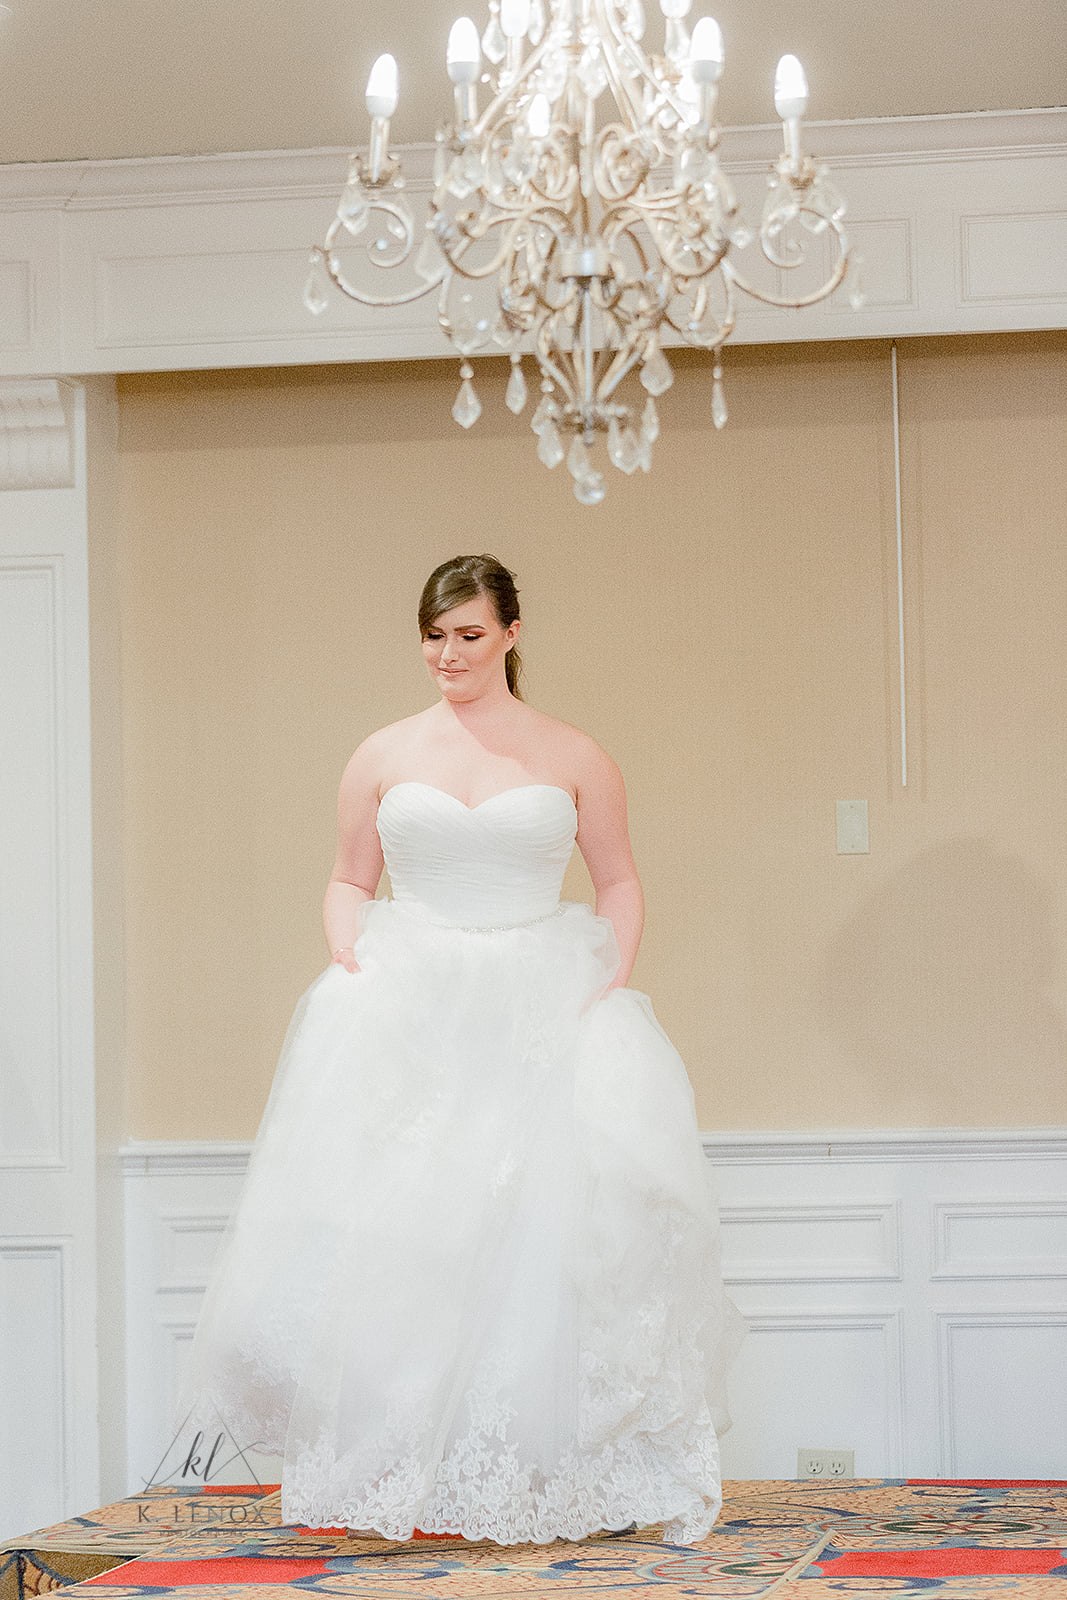 Wedding Dress for Every Silhouette | K. Lenox Photography